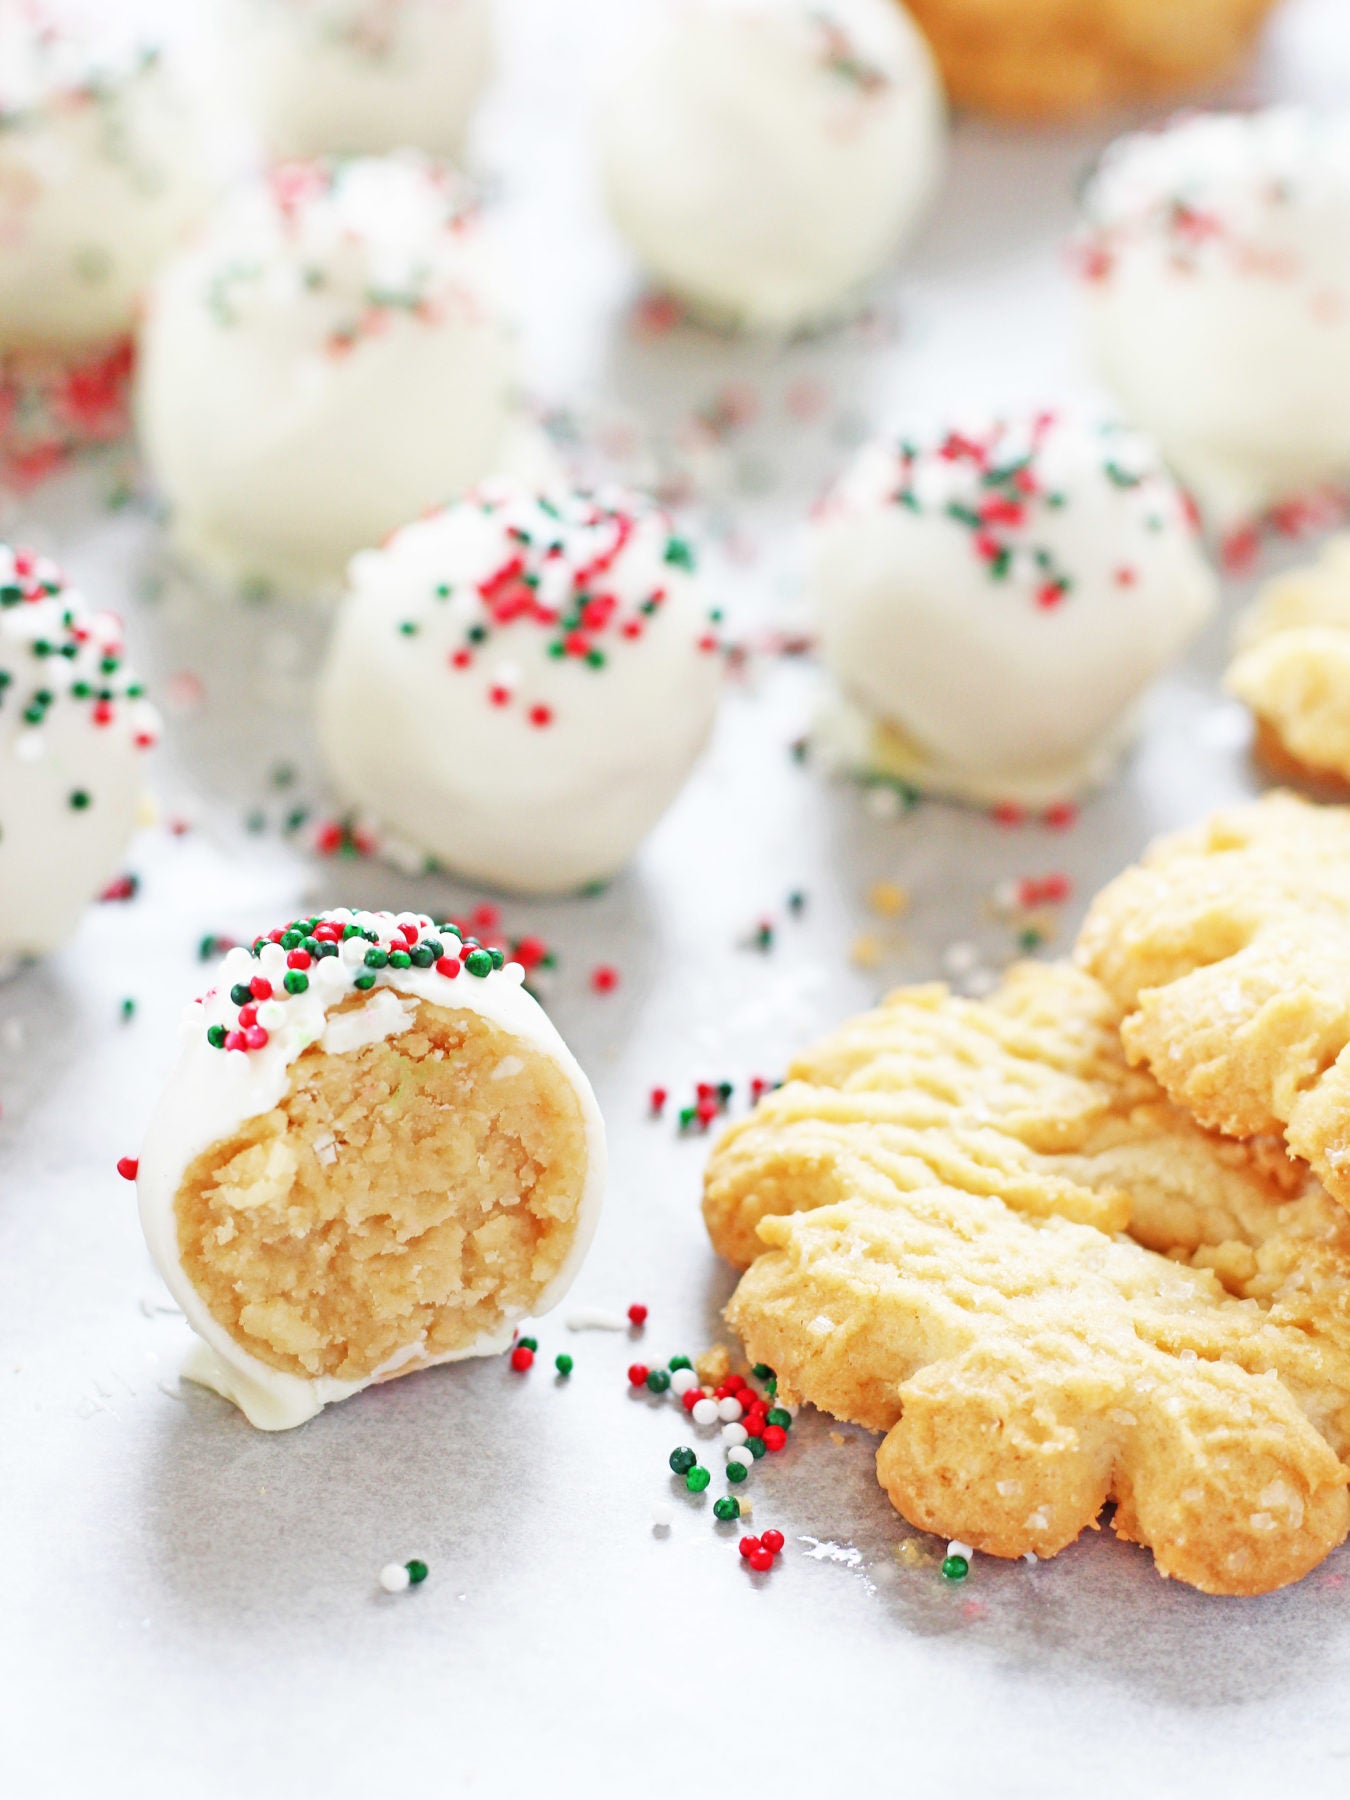 13 Desserts To Make This Holiday That Aren't Pie
